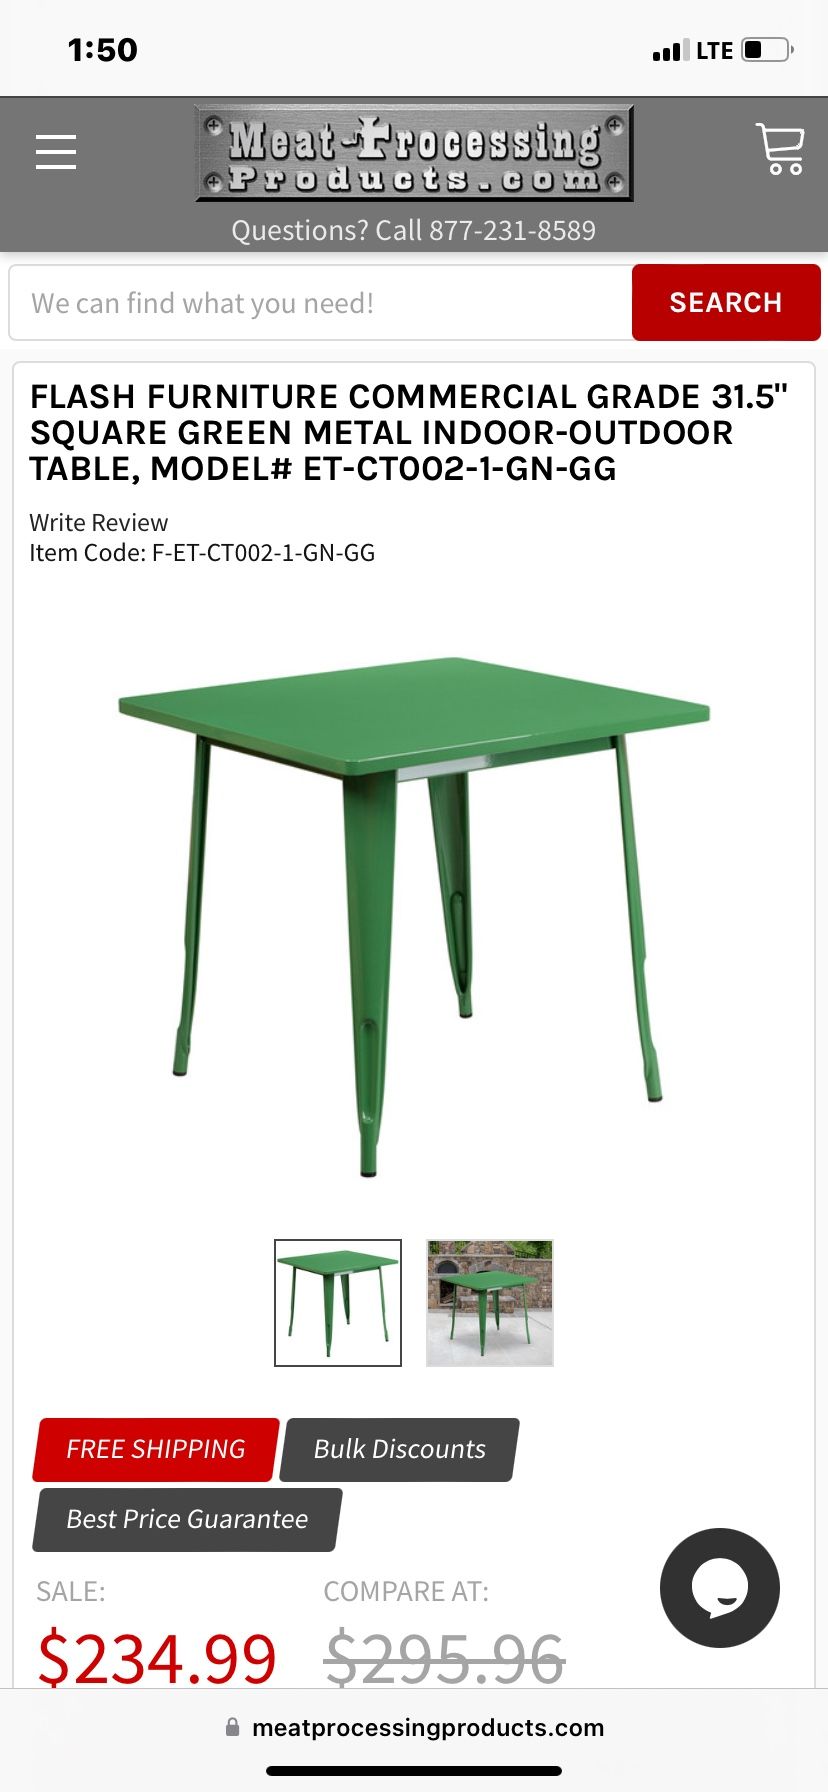 FLASH FURNITURE COMMERCIAL GRADE 31.5" SQUARE GREEN METAL INDOOR-OUTDOOR TABLE, 